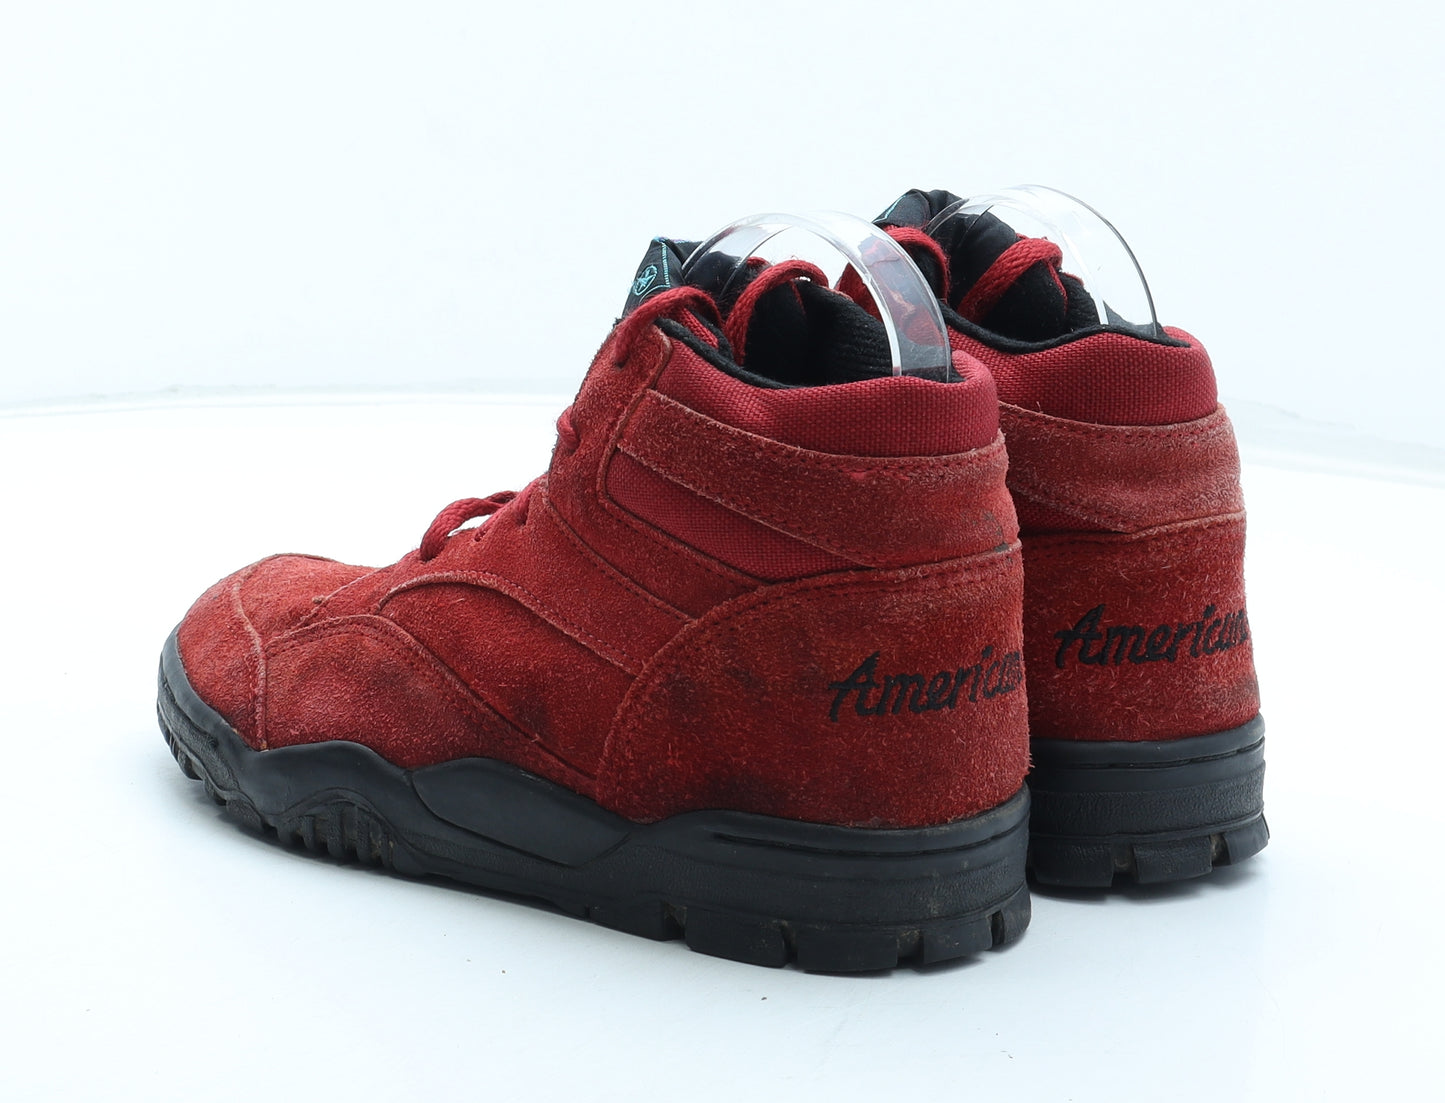 Americano Womens Red Leather Trainer UK